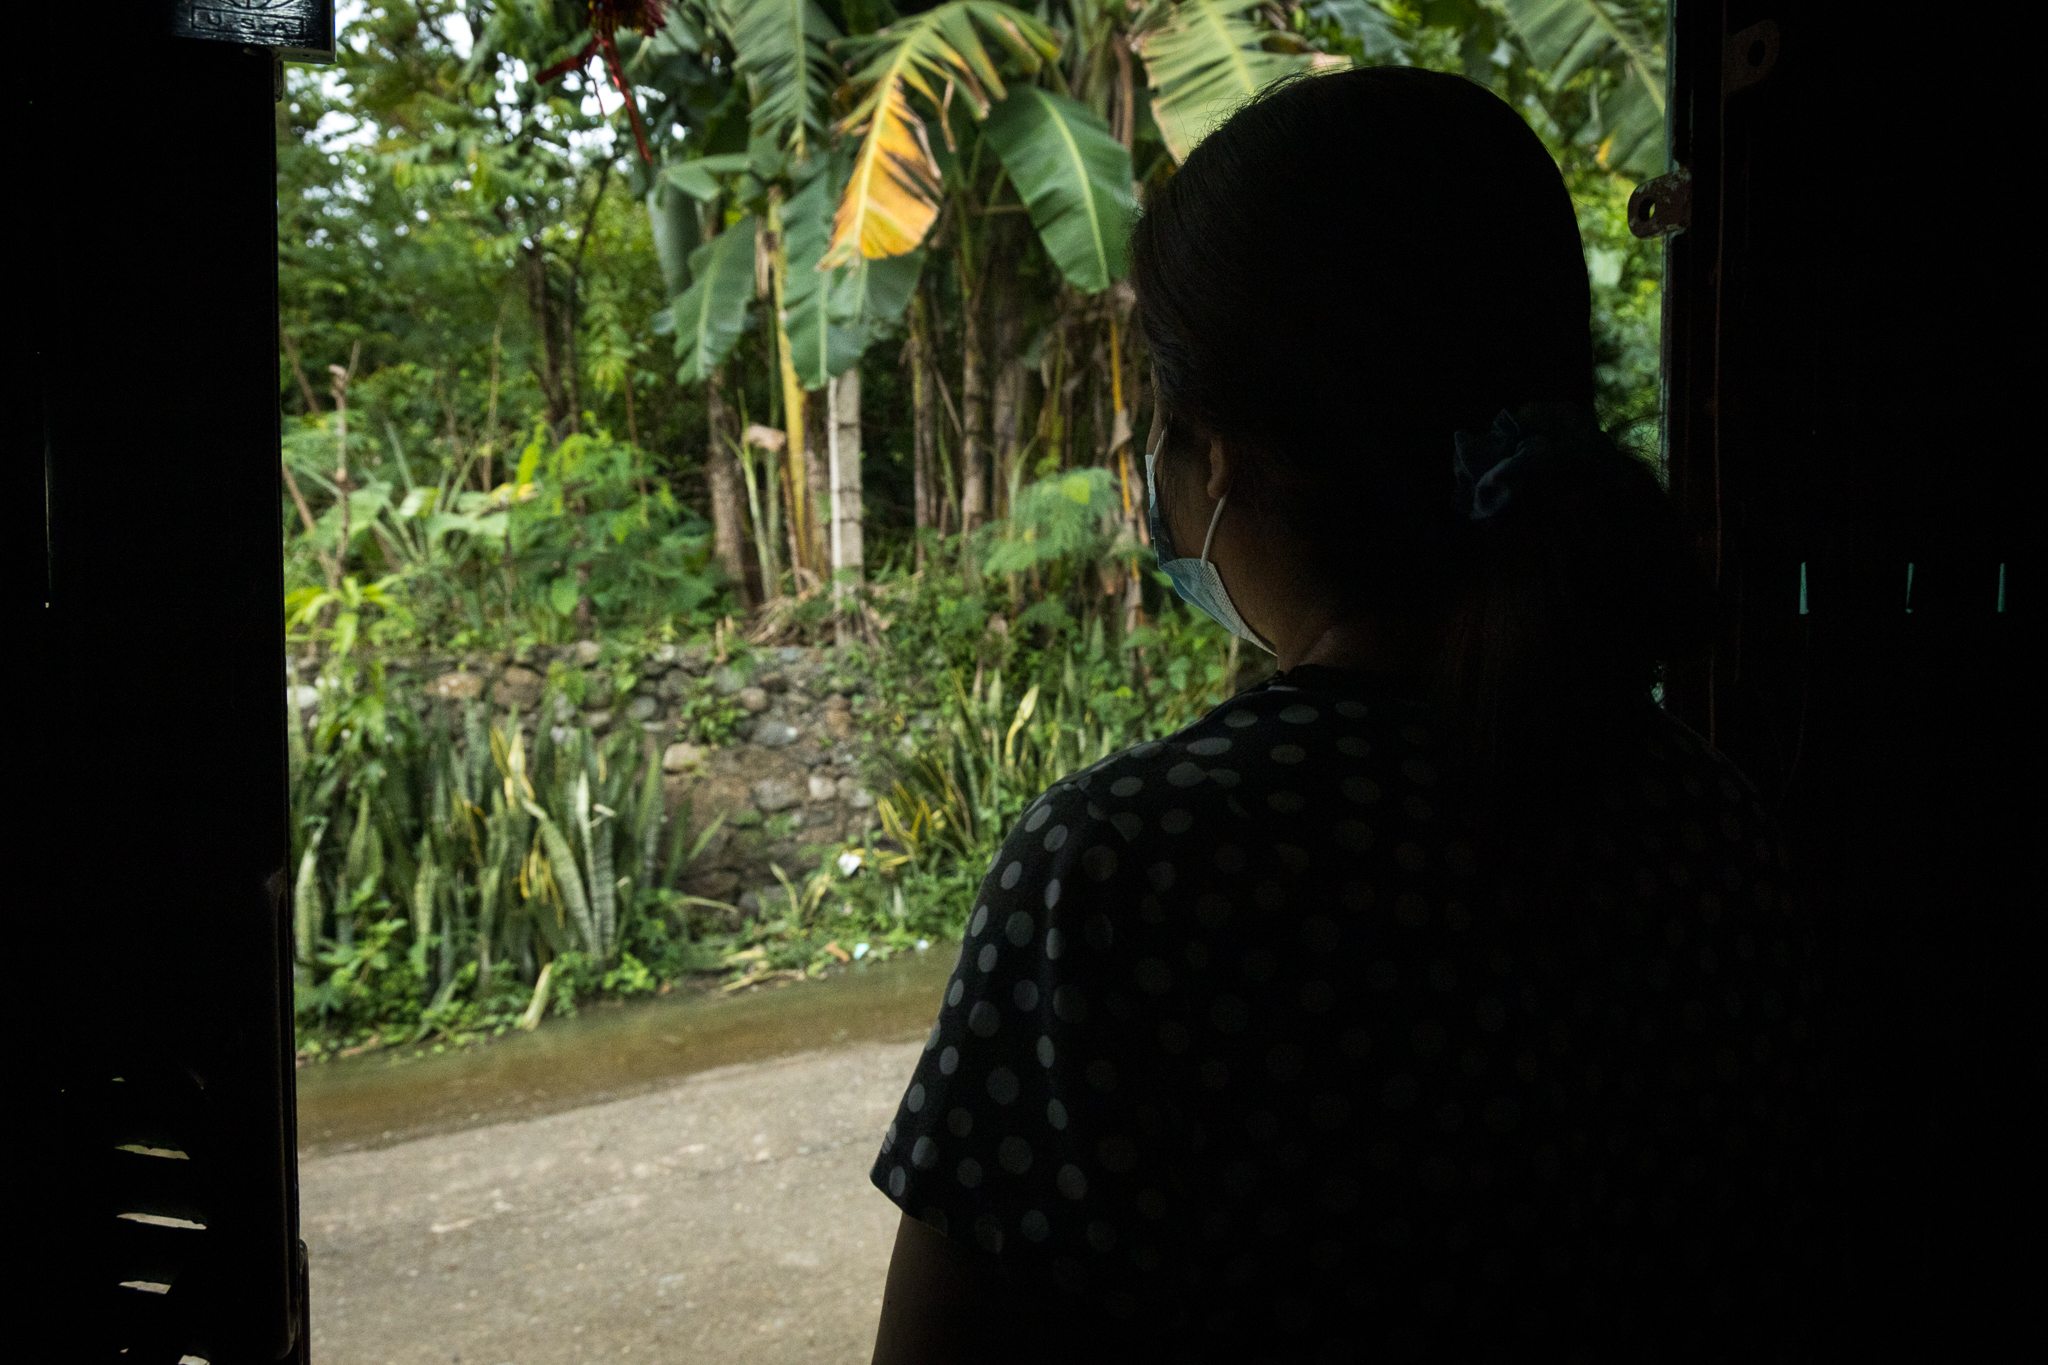 Victims of gender based violence, during World Vision Philippines Intervention for abused women during Typhoon Goon